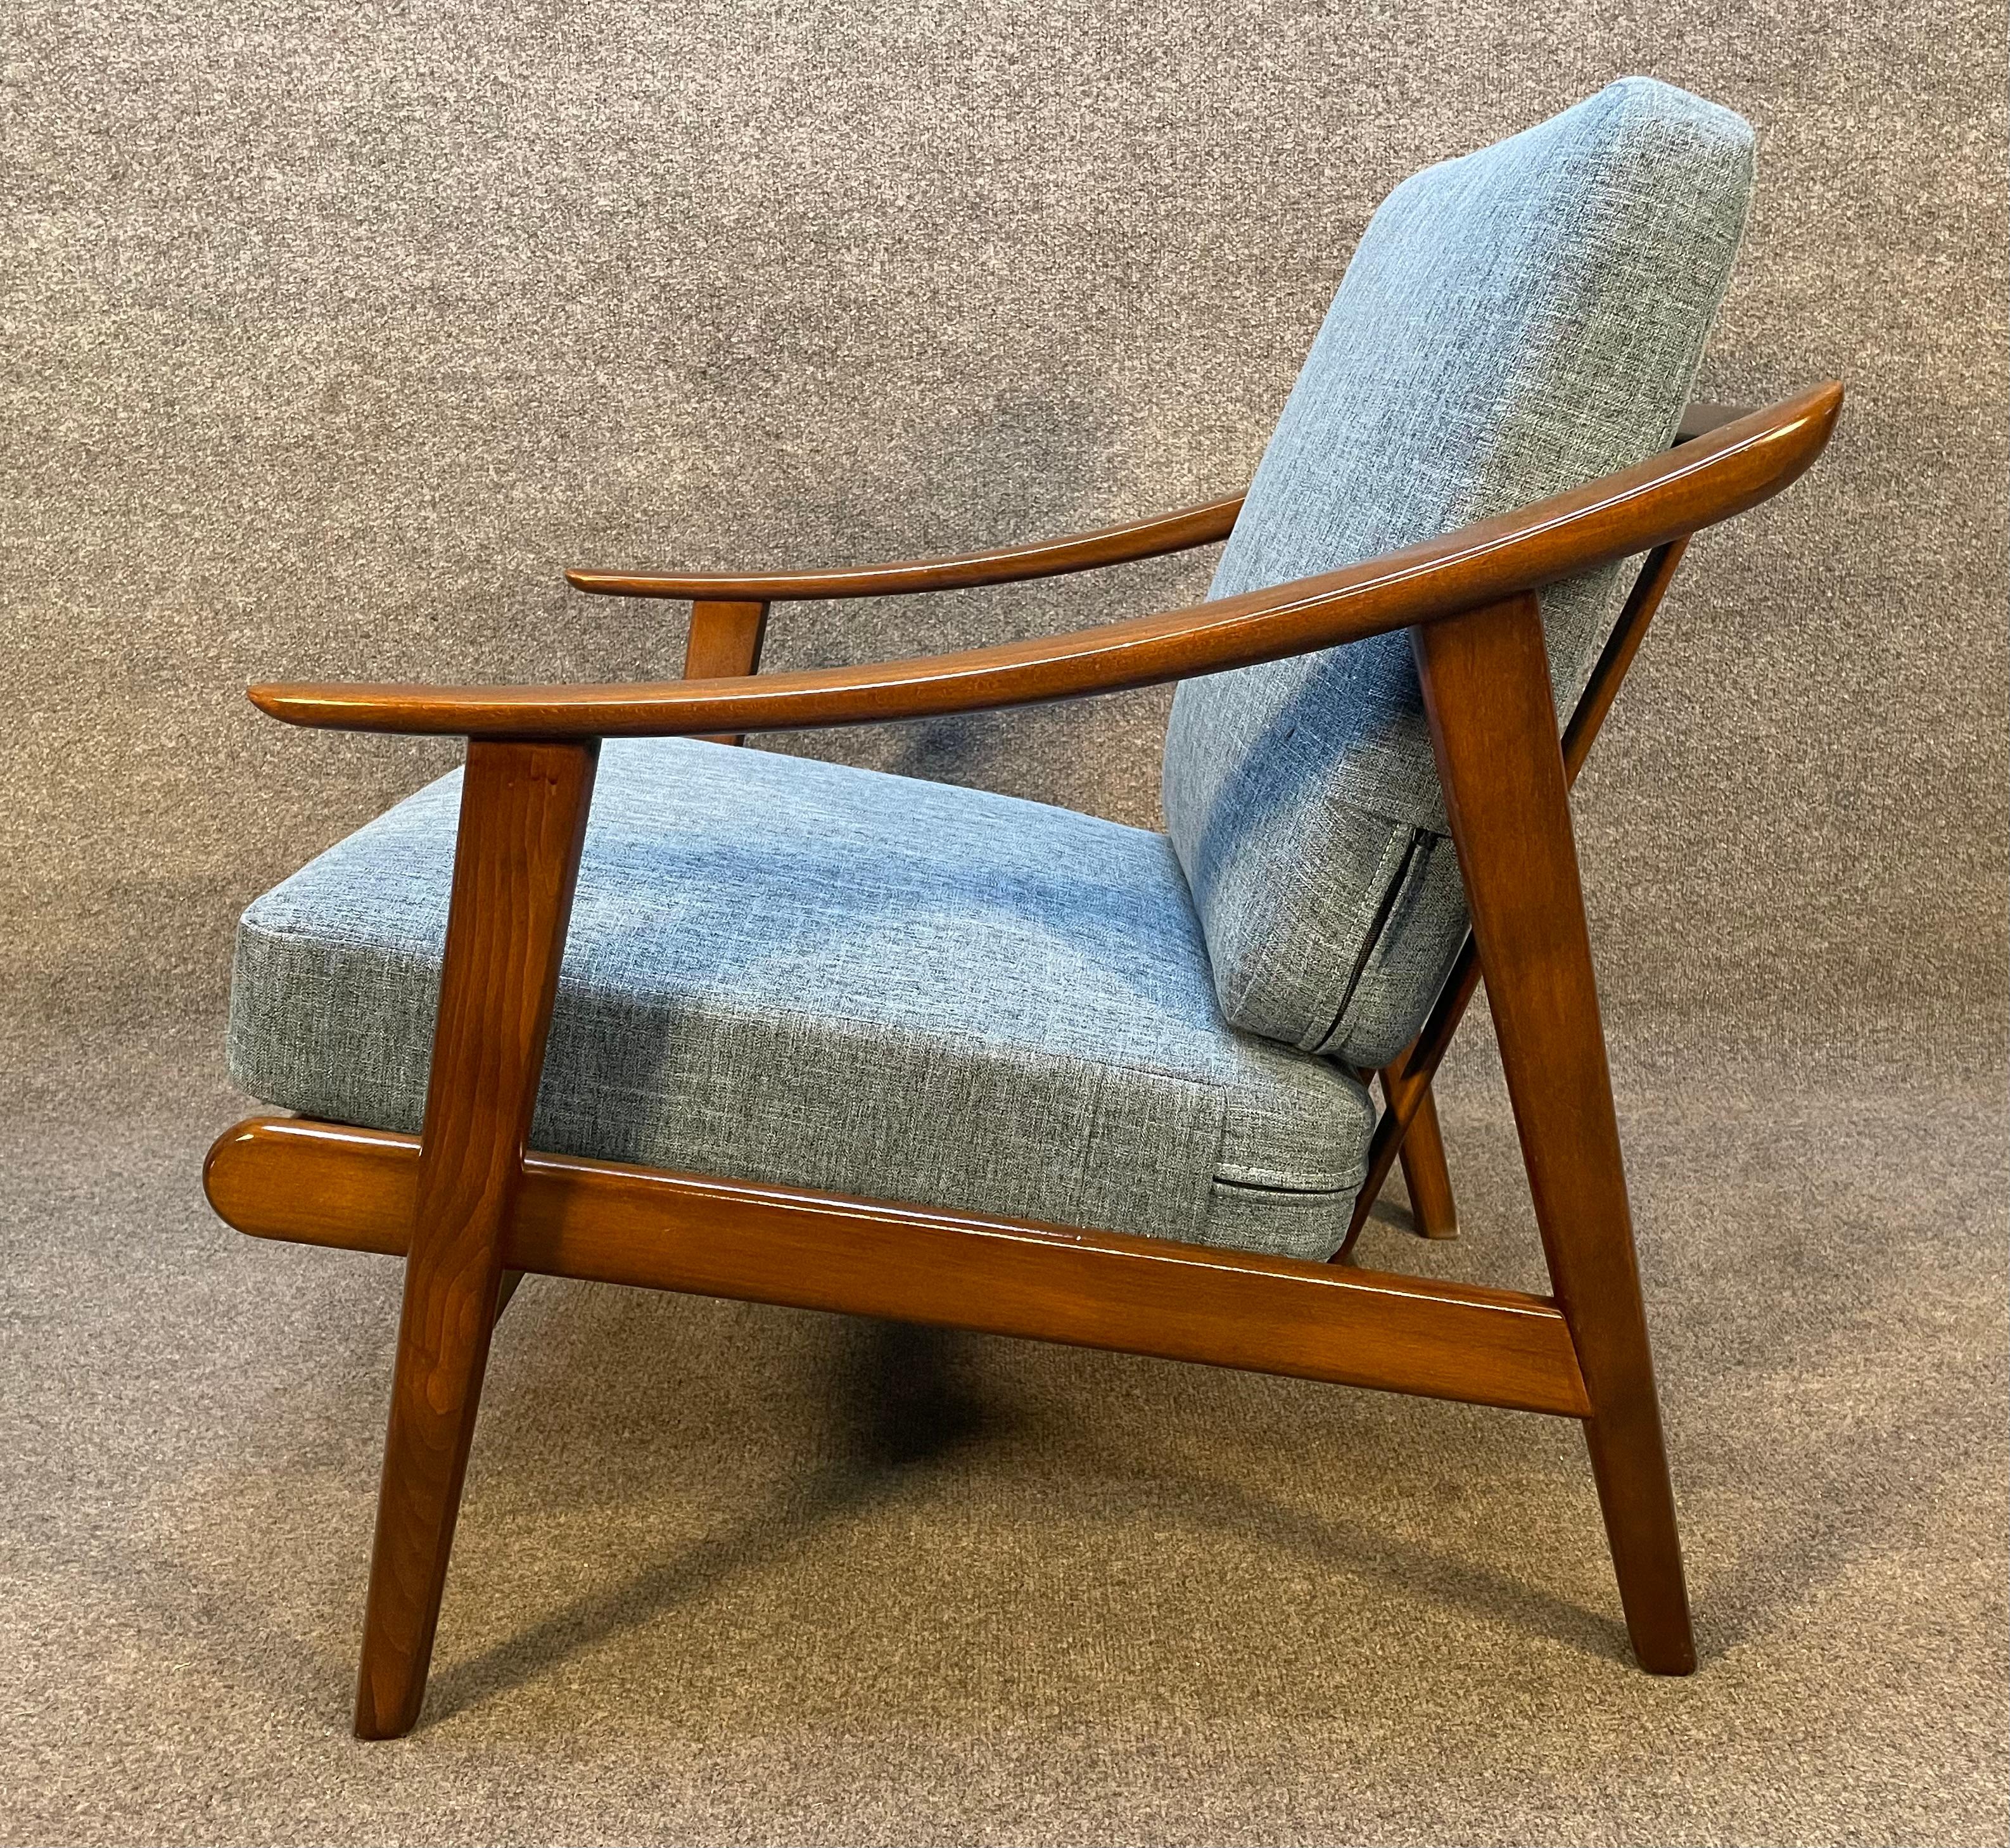 Here is a beautiful Scandinavian modern easy chair in walnut color stained birch wood manufactured in Denmark in the 1960's.
This comfortable chair, recently imported from Europe, features a sculptural frame cleaned up and oiled reminiscent of